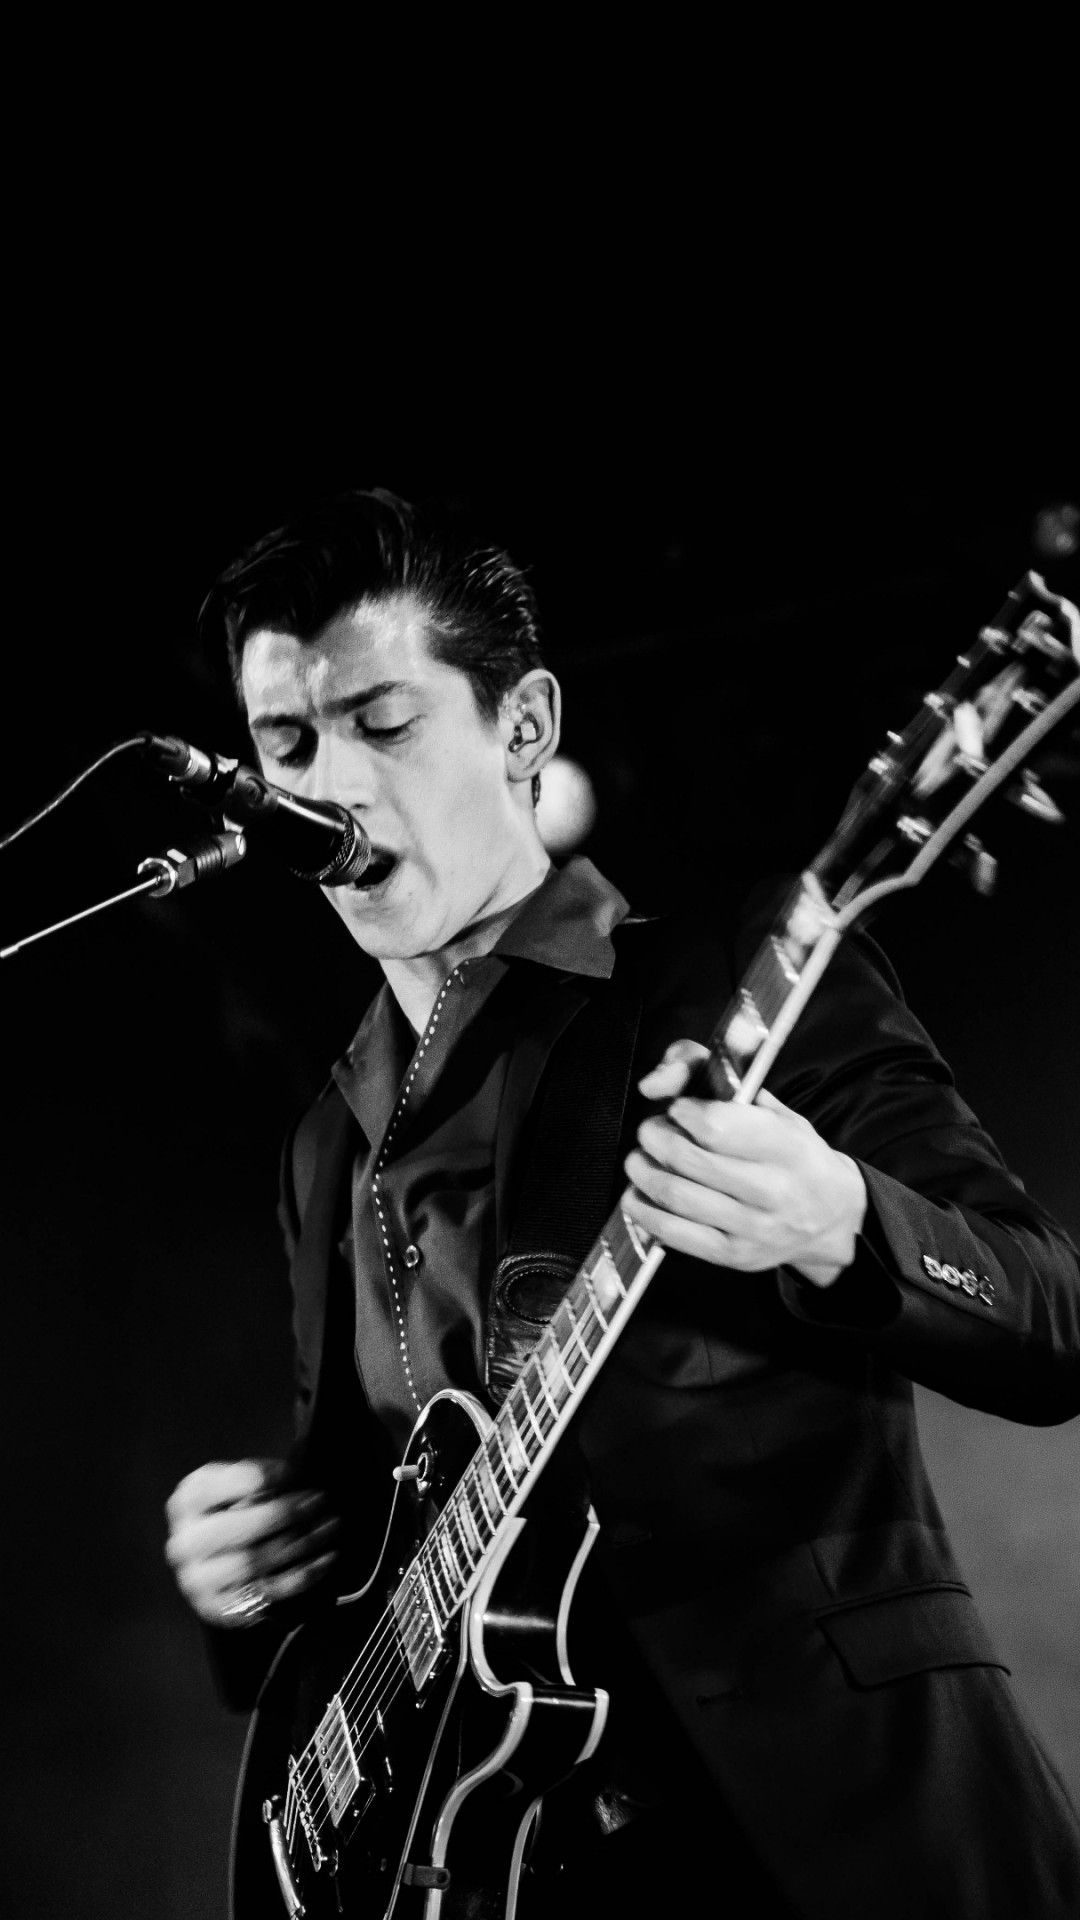 Alex Turner Iphone Wallpaper posted by Michelle Anderson 1080x1920